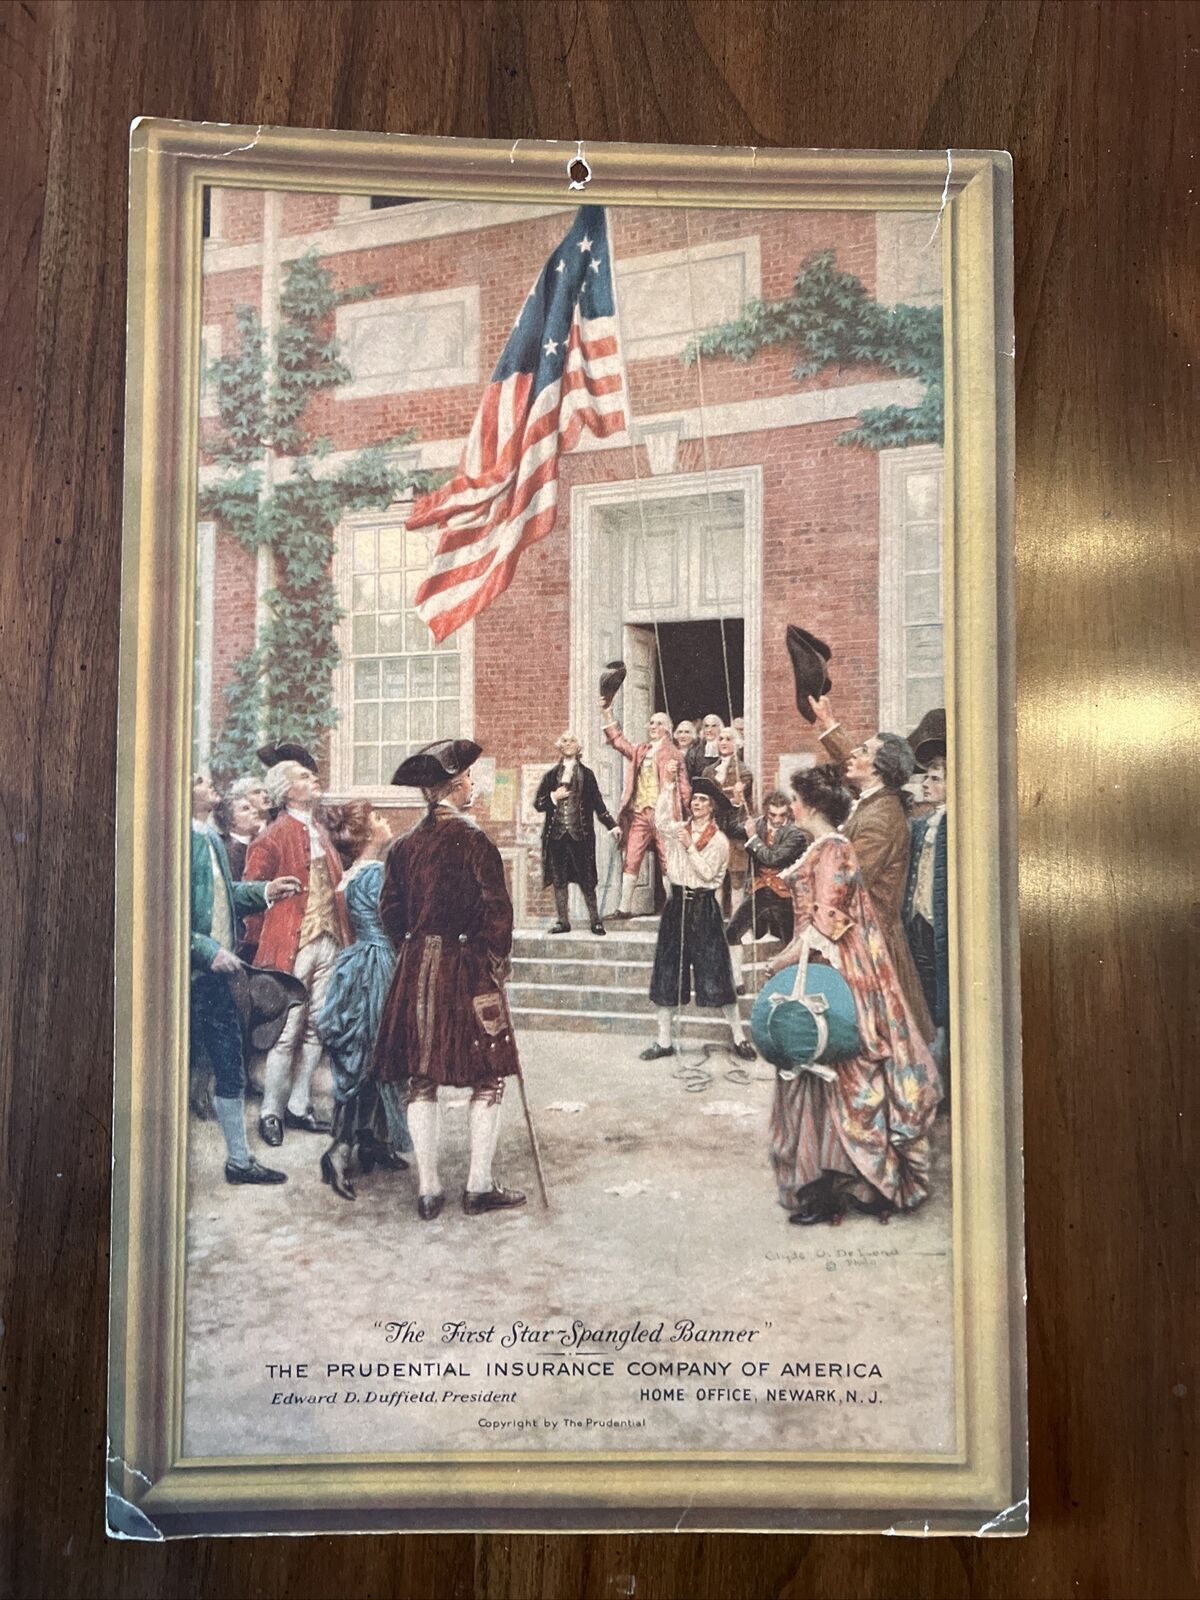 Antique 1926 Prudential Insurance Company Calendar, First Star Spangled Banner